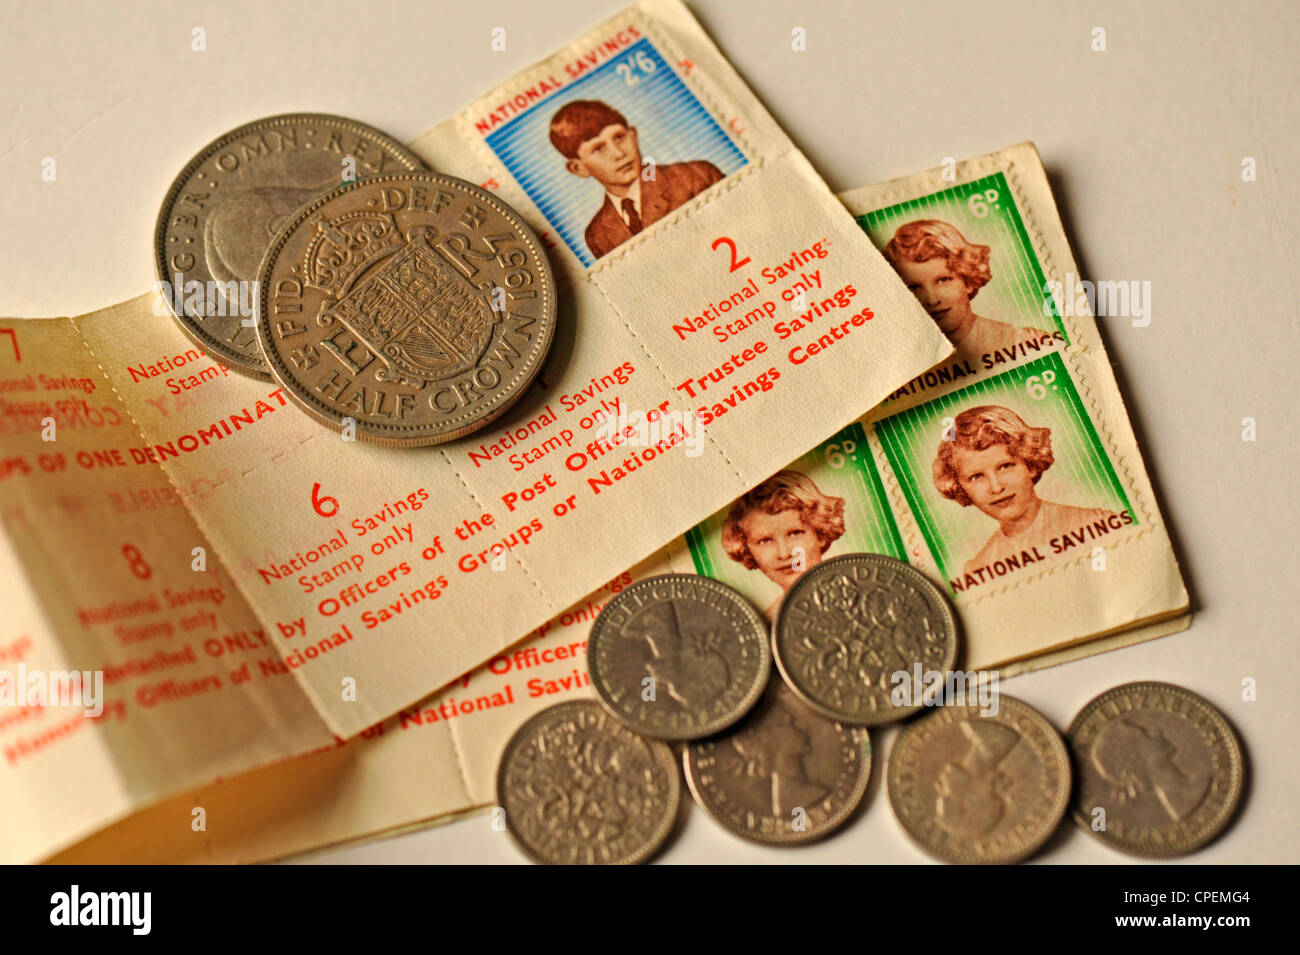 Old coins and National Savings stamps Stock Photo